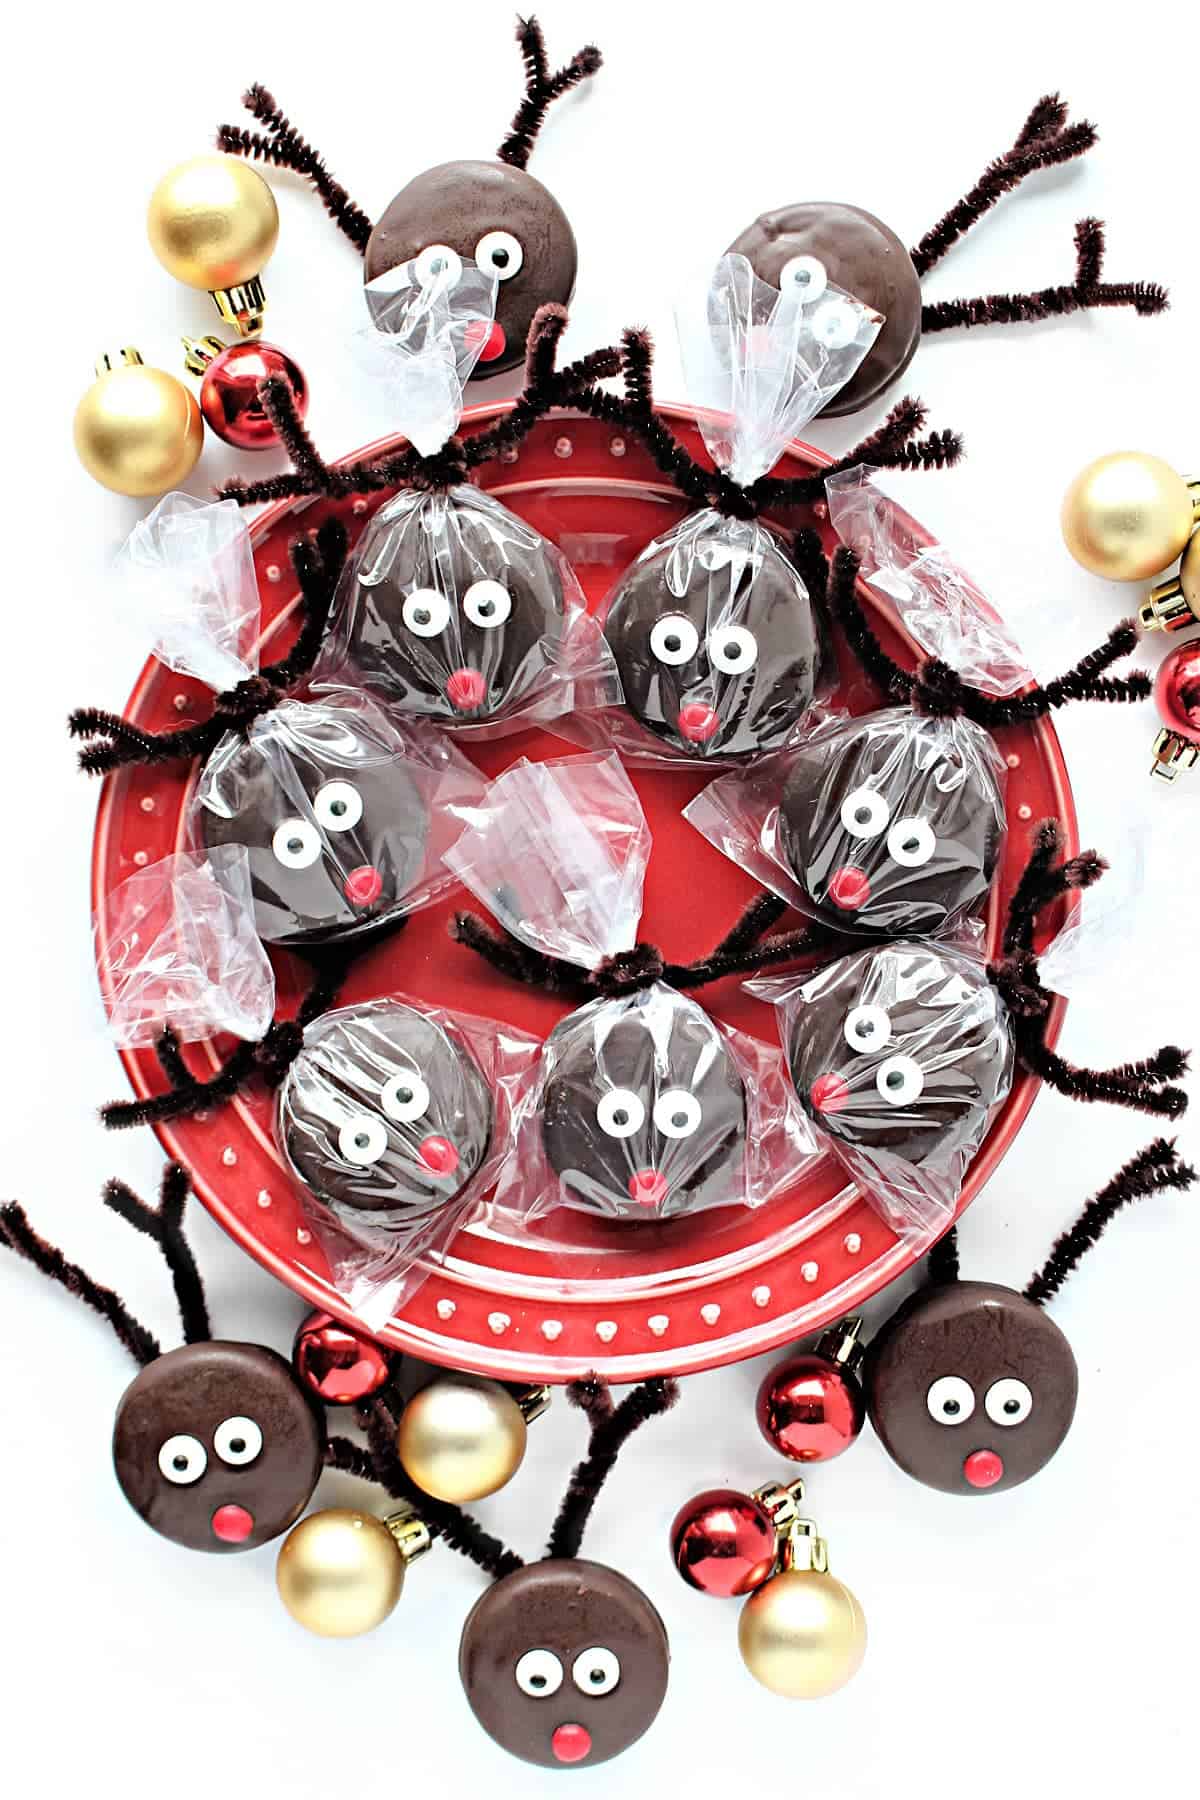 Chocolate dipped oreo cookies on a platter decorated to look like Rudolph.